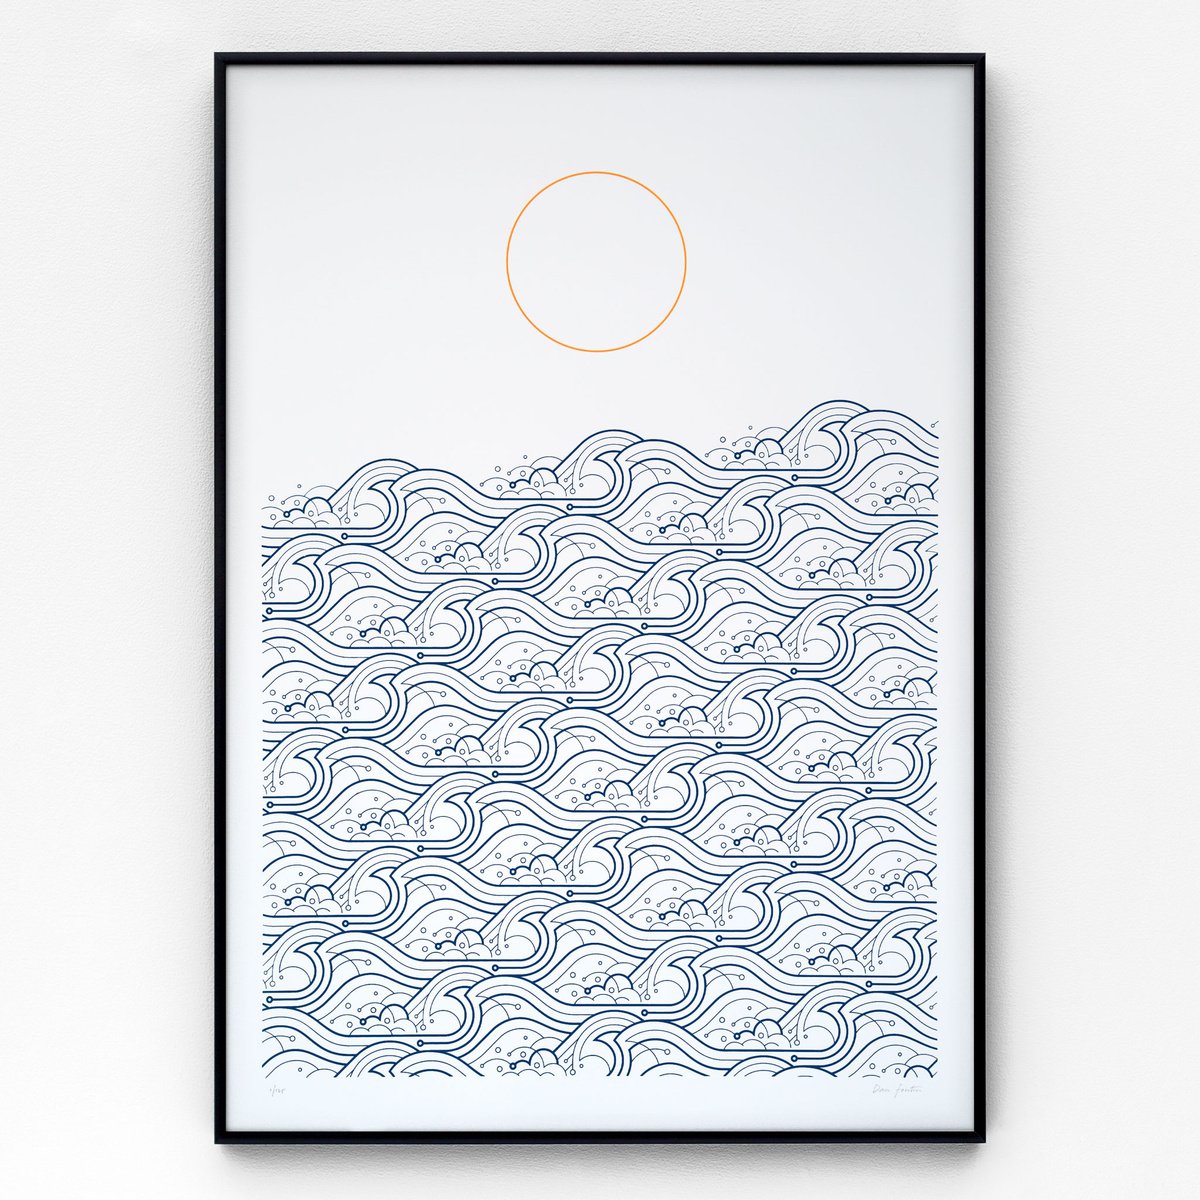 Waves A2 limited edition screen print by The Lost Fox